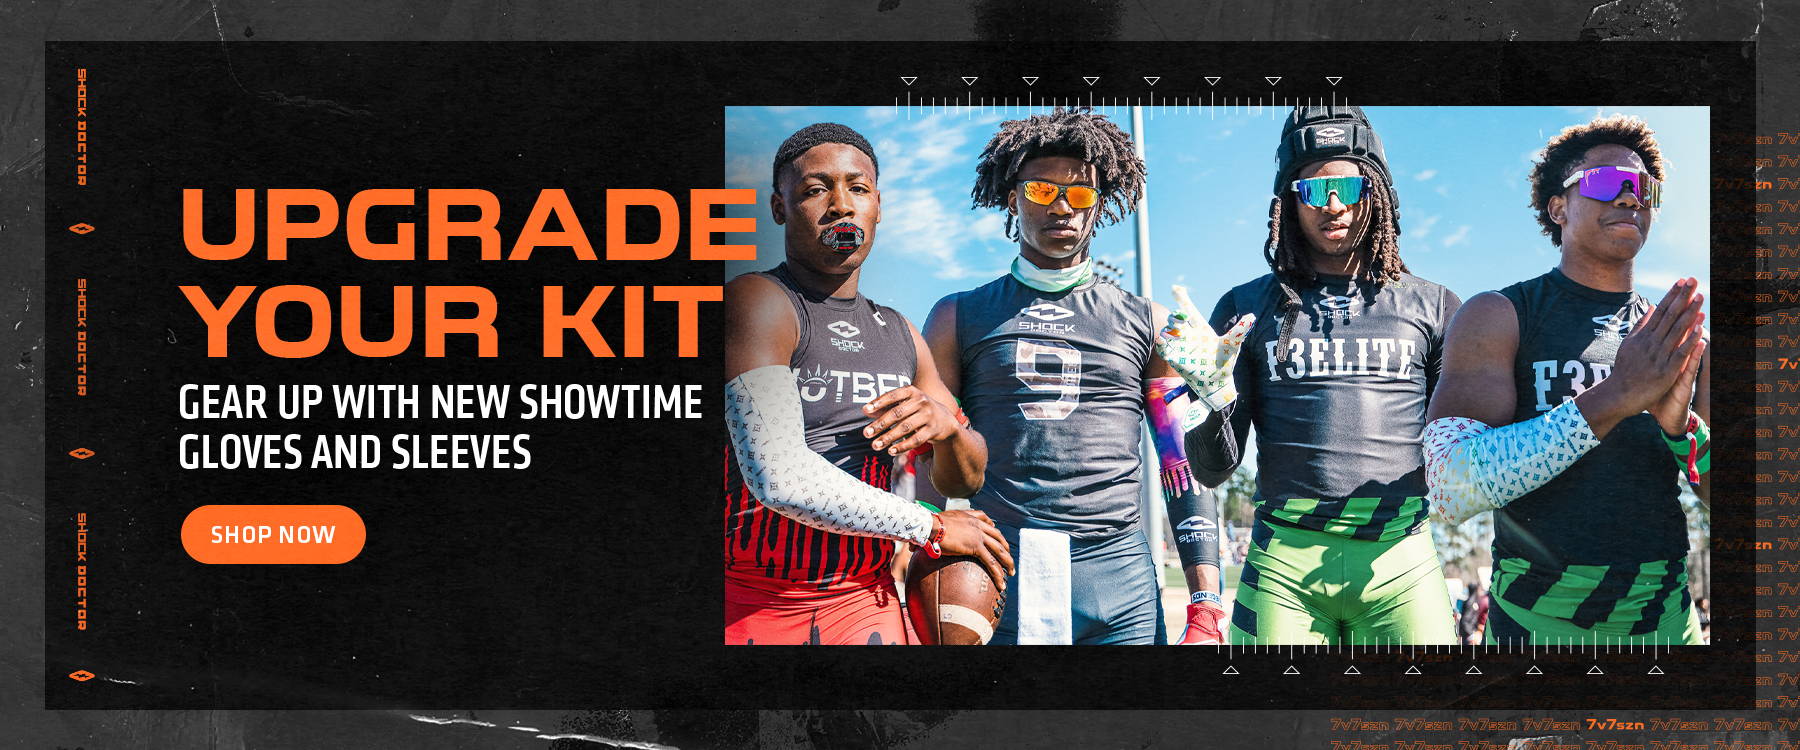 Upgrade your kit. Gear up with new showtime gloves and sleeves. shop now.